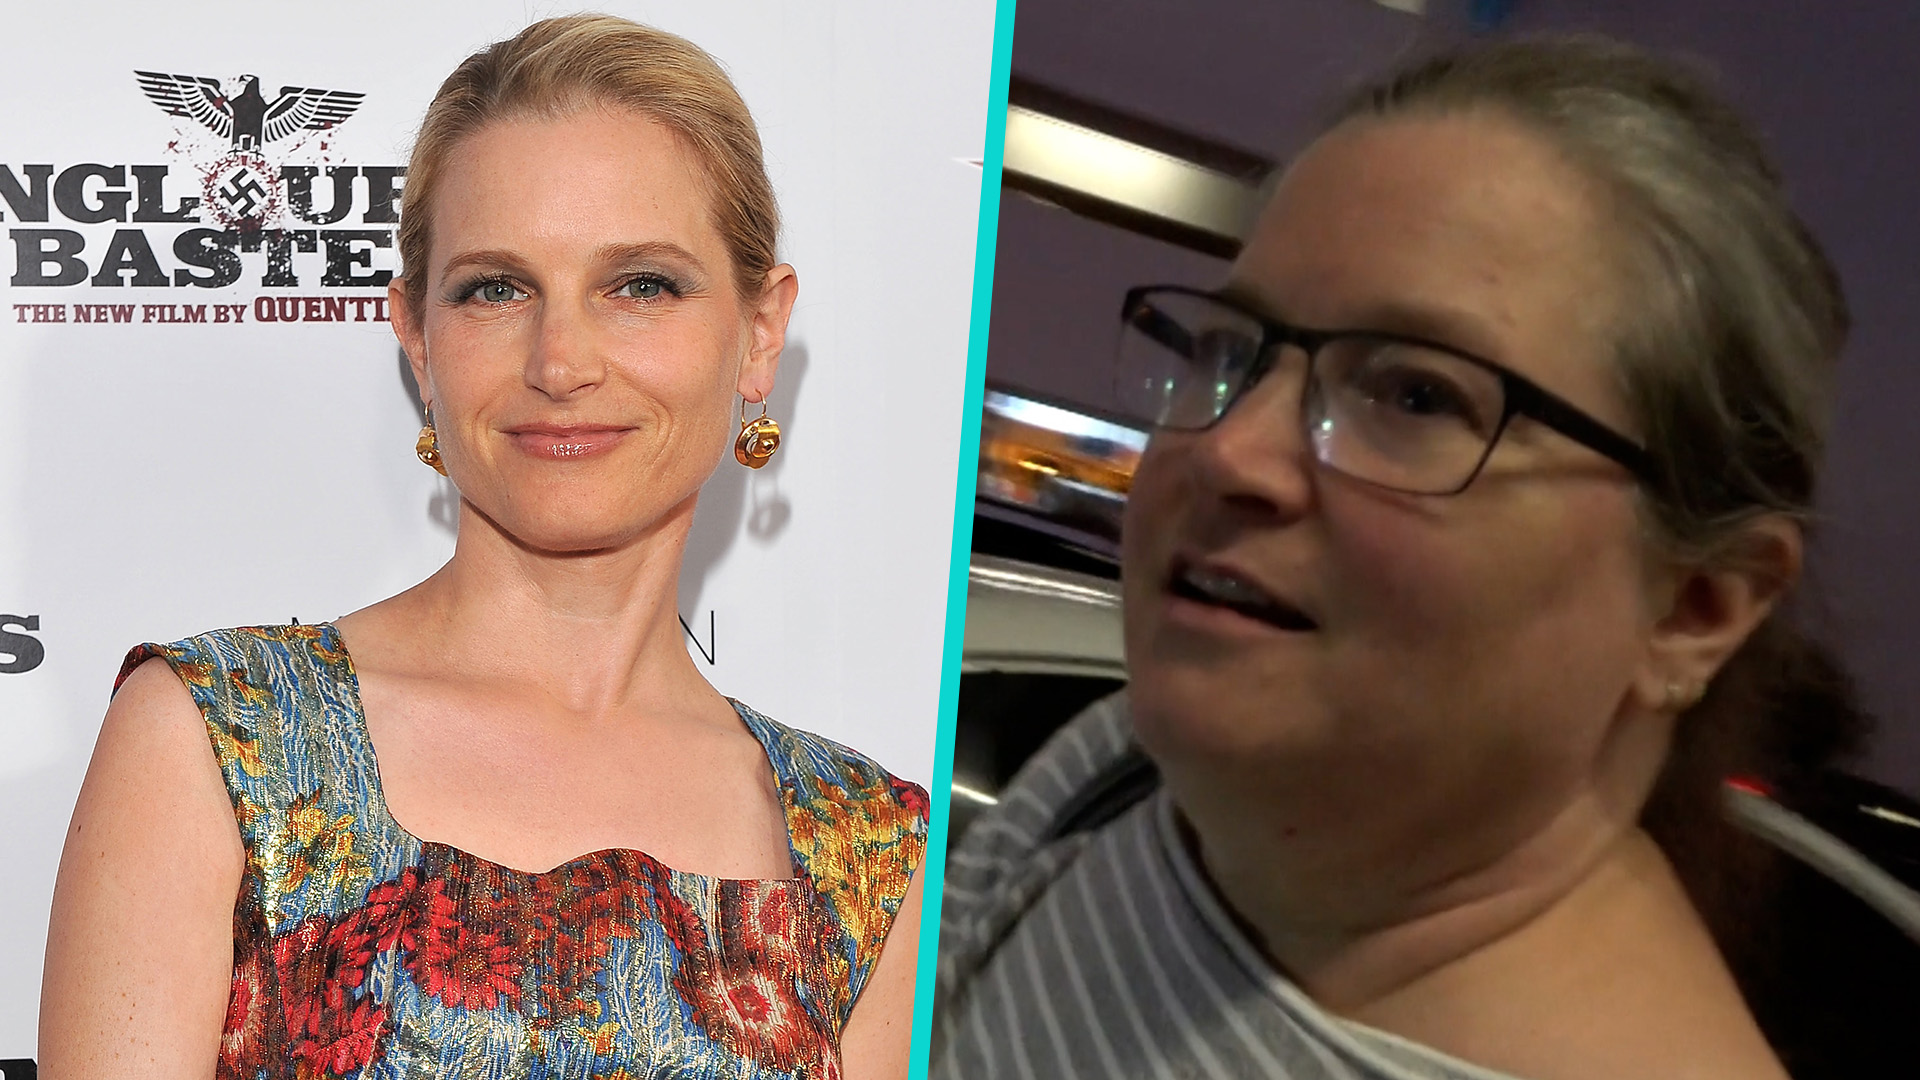 Bridget Fonda Reveals Why She Doesn't Act Anymore in Rare Interview